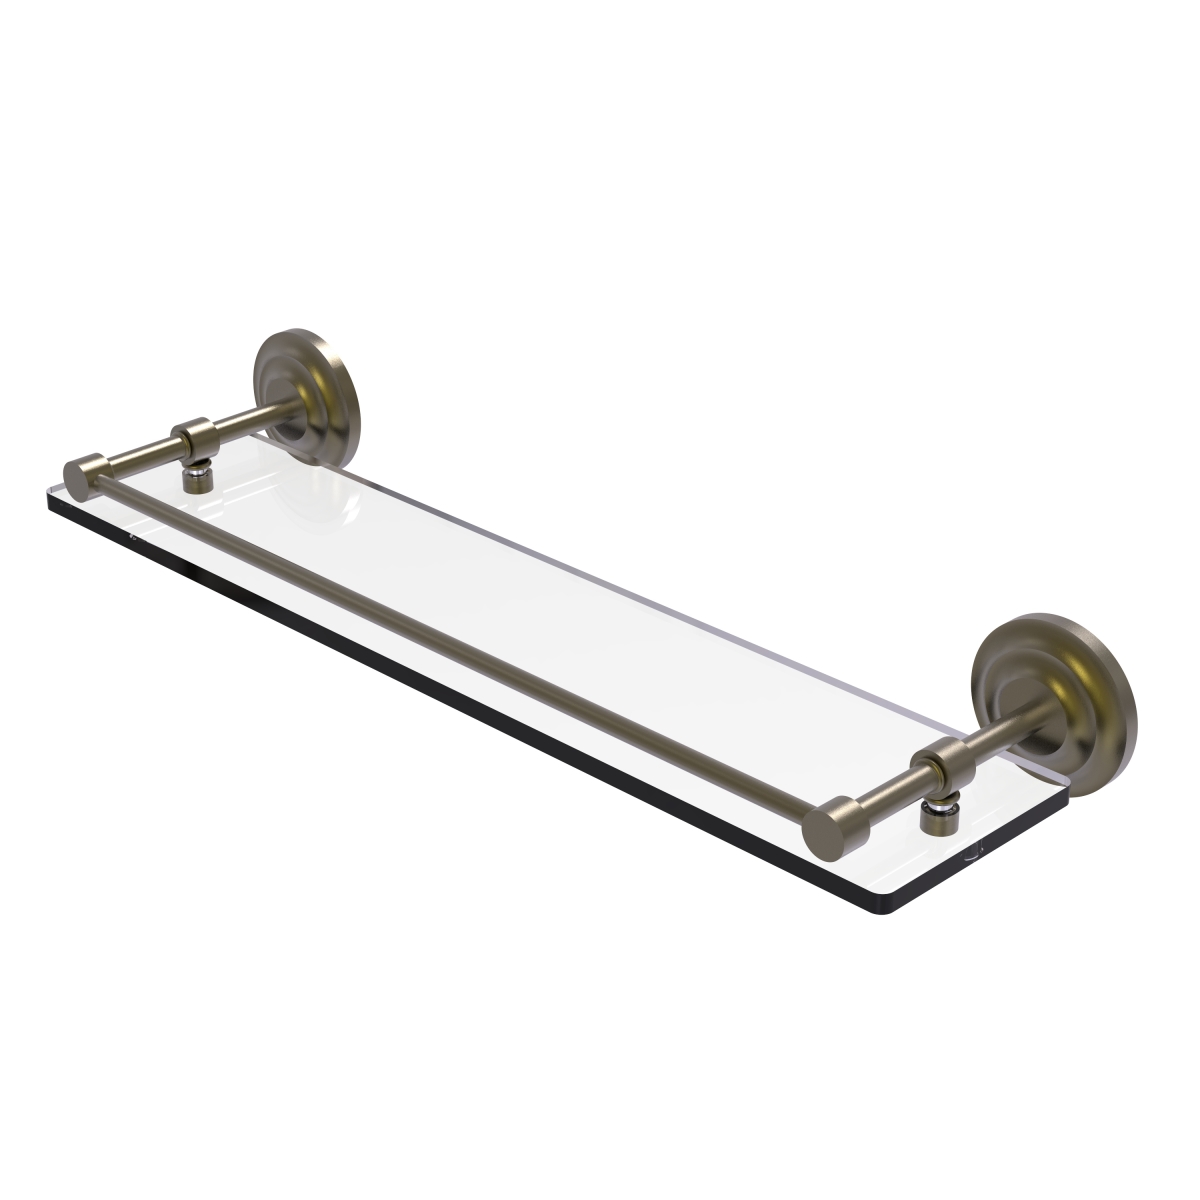 Allied Brass QN-1-22-GAL-ABR 22 in. Que New Tempered Glass Shelf with Gallery Rail, Antique Brass